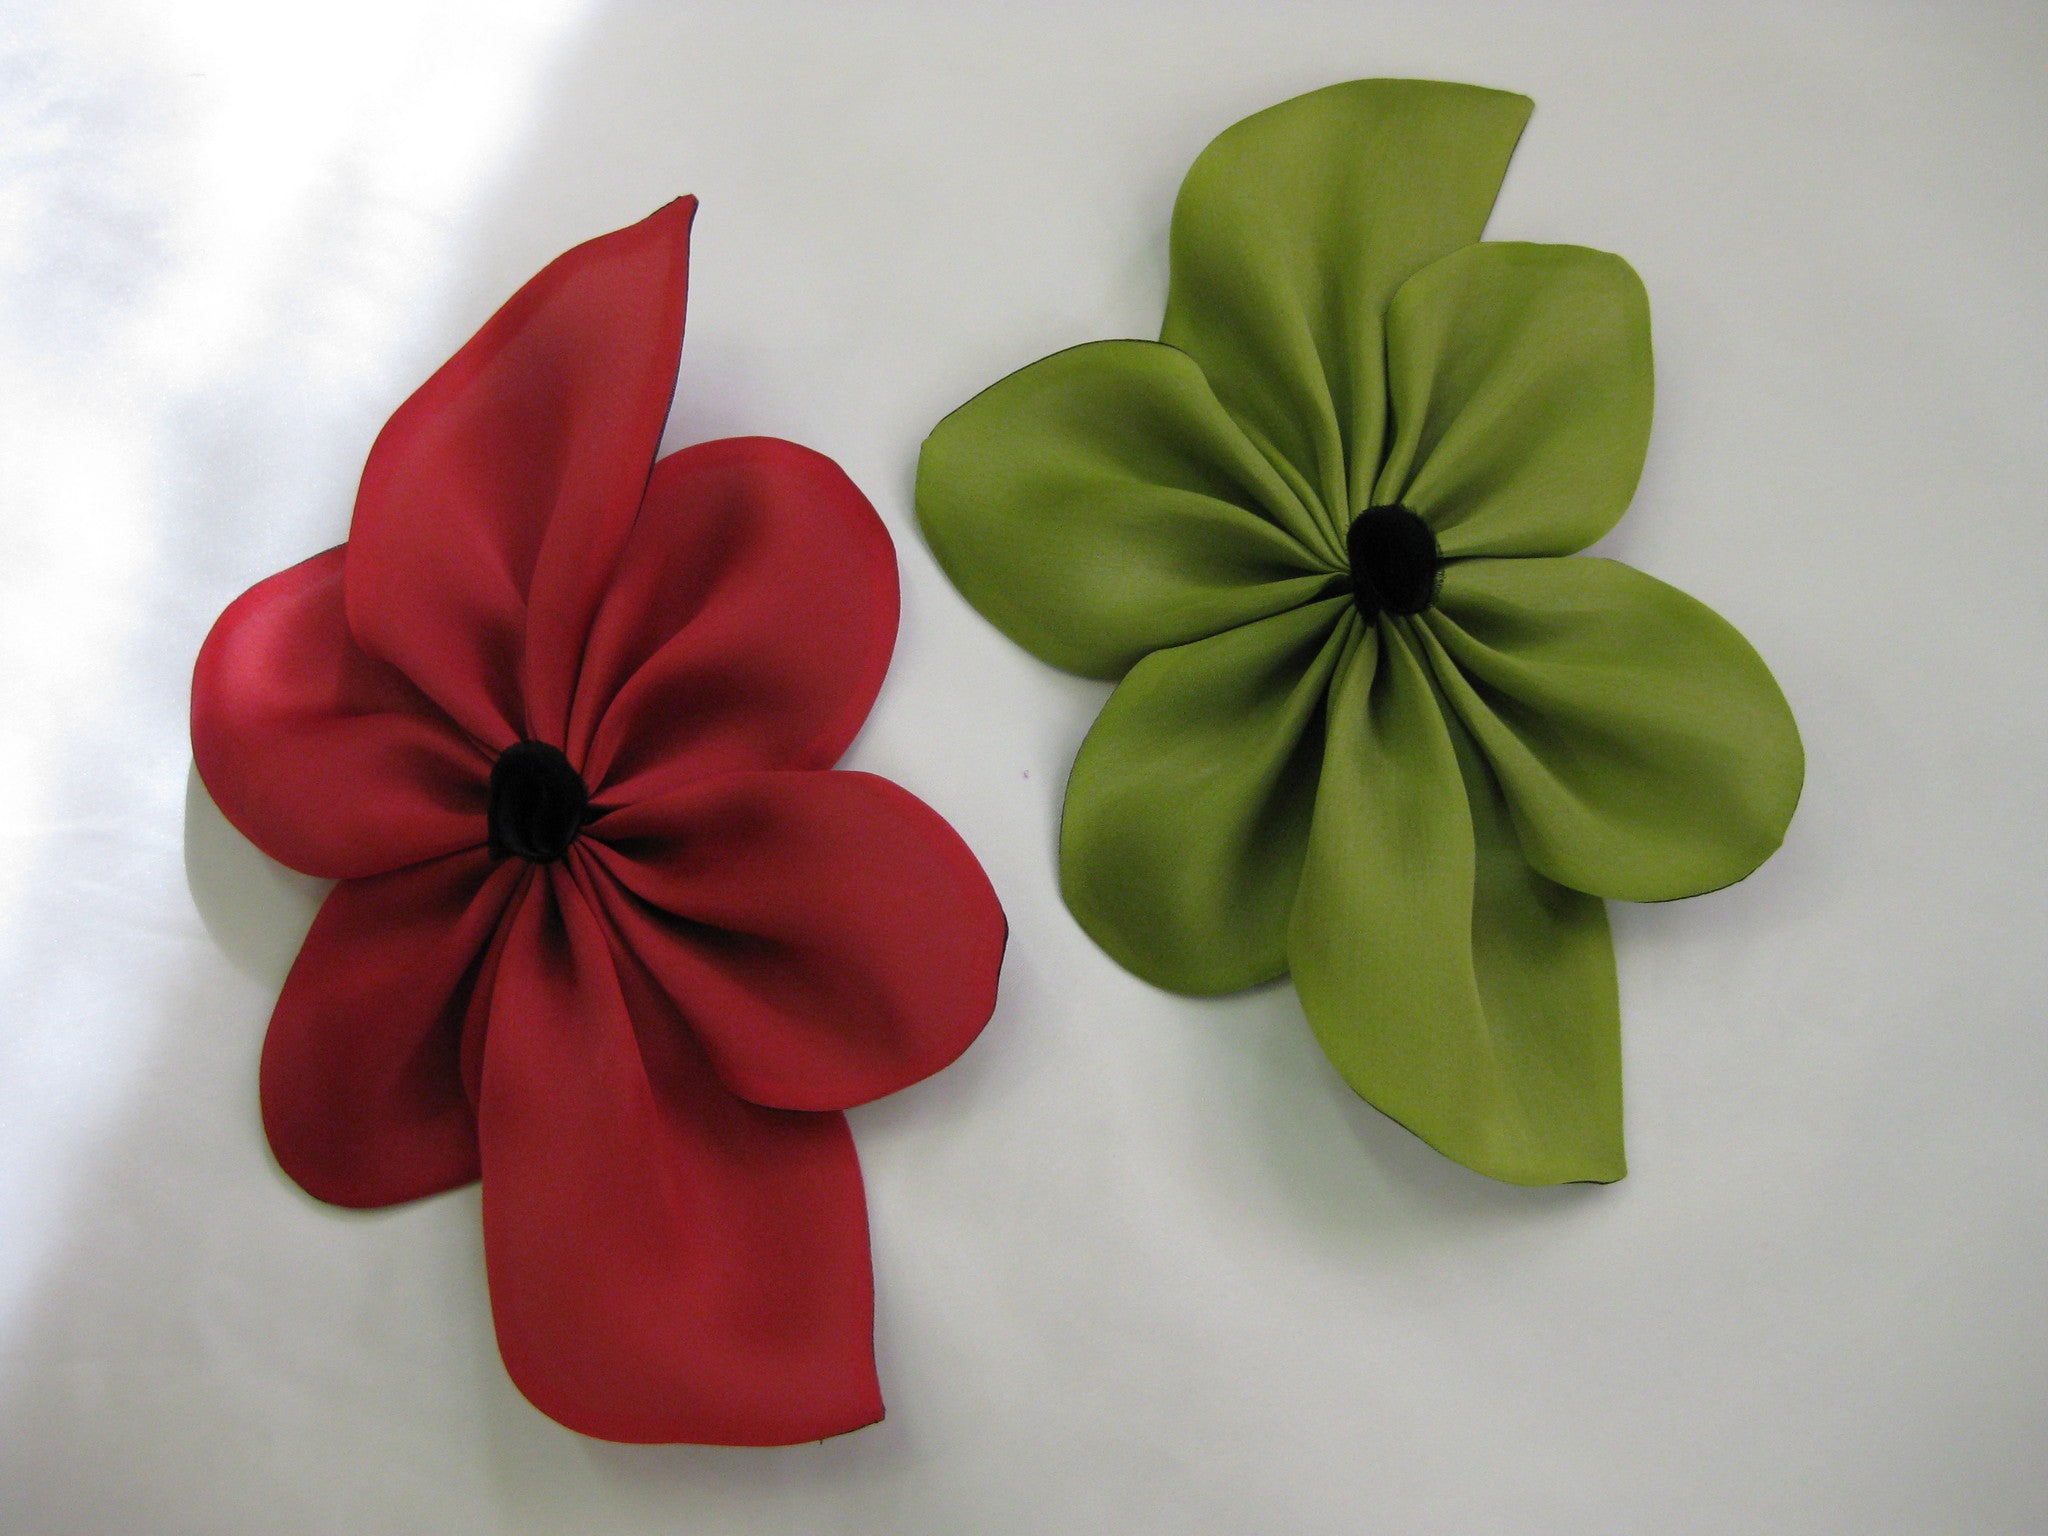  Flower Pins For Clothes